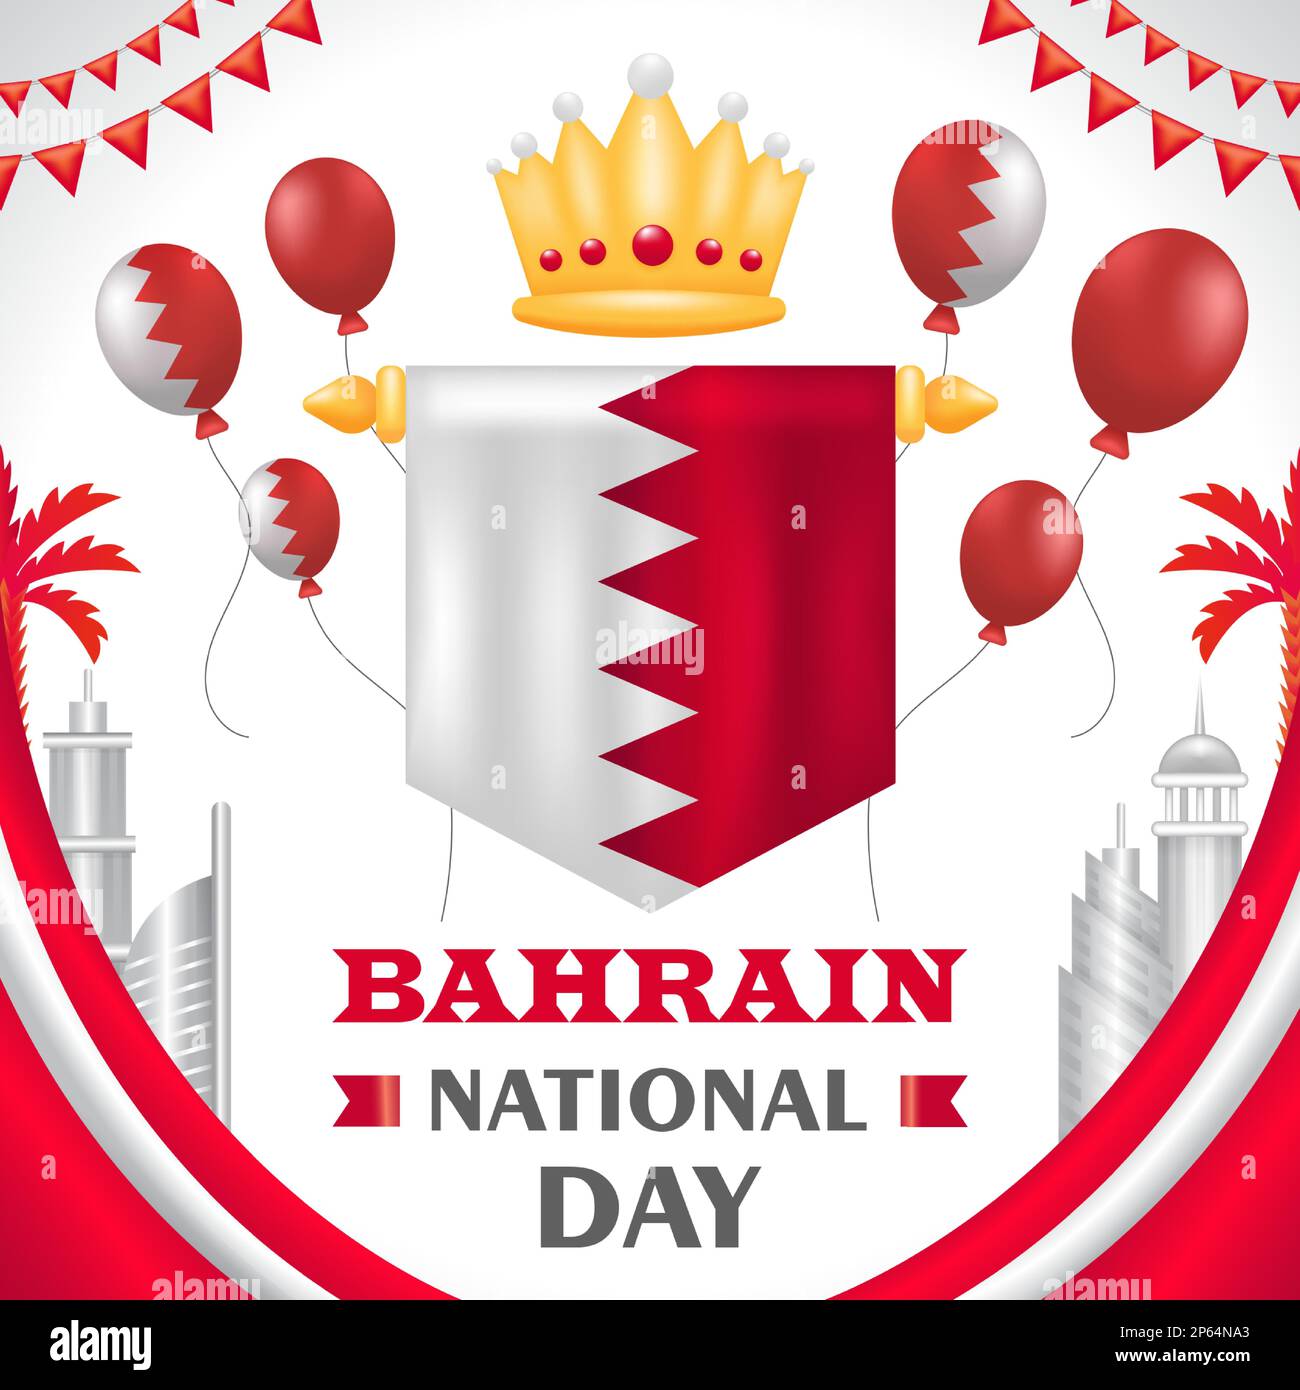 Bahrain National Day, 3d illustration of flag and crown with building ornaments and balloons Stock Vector